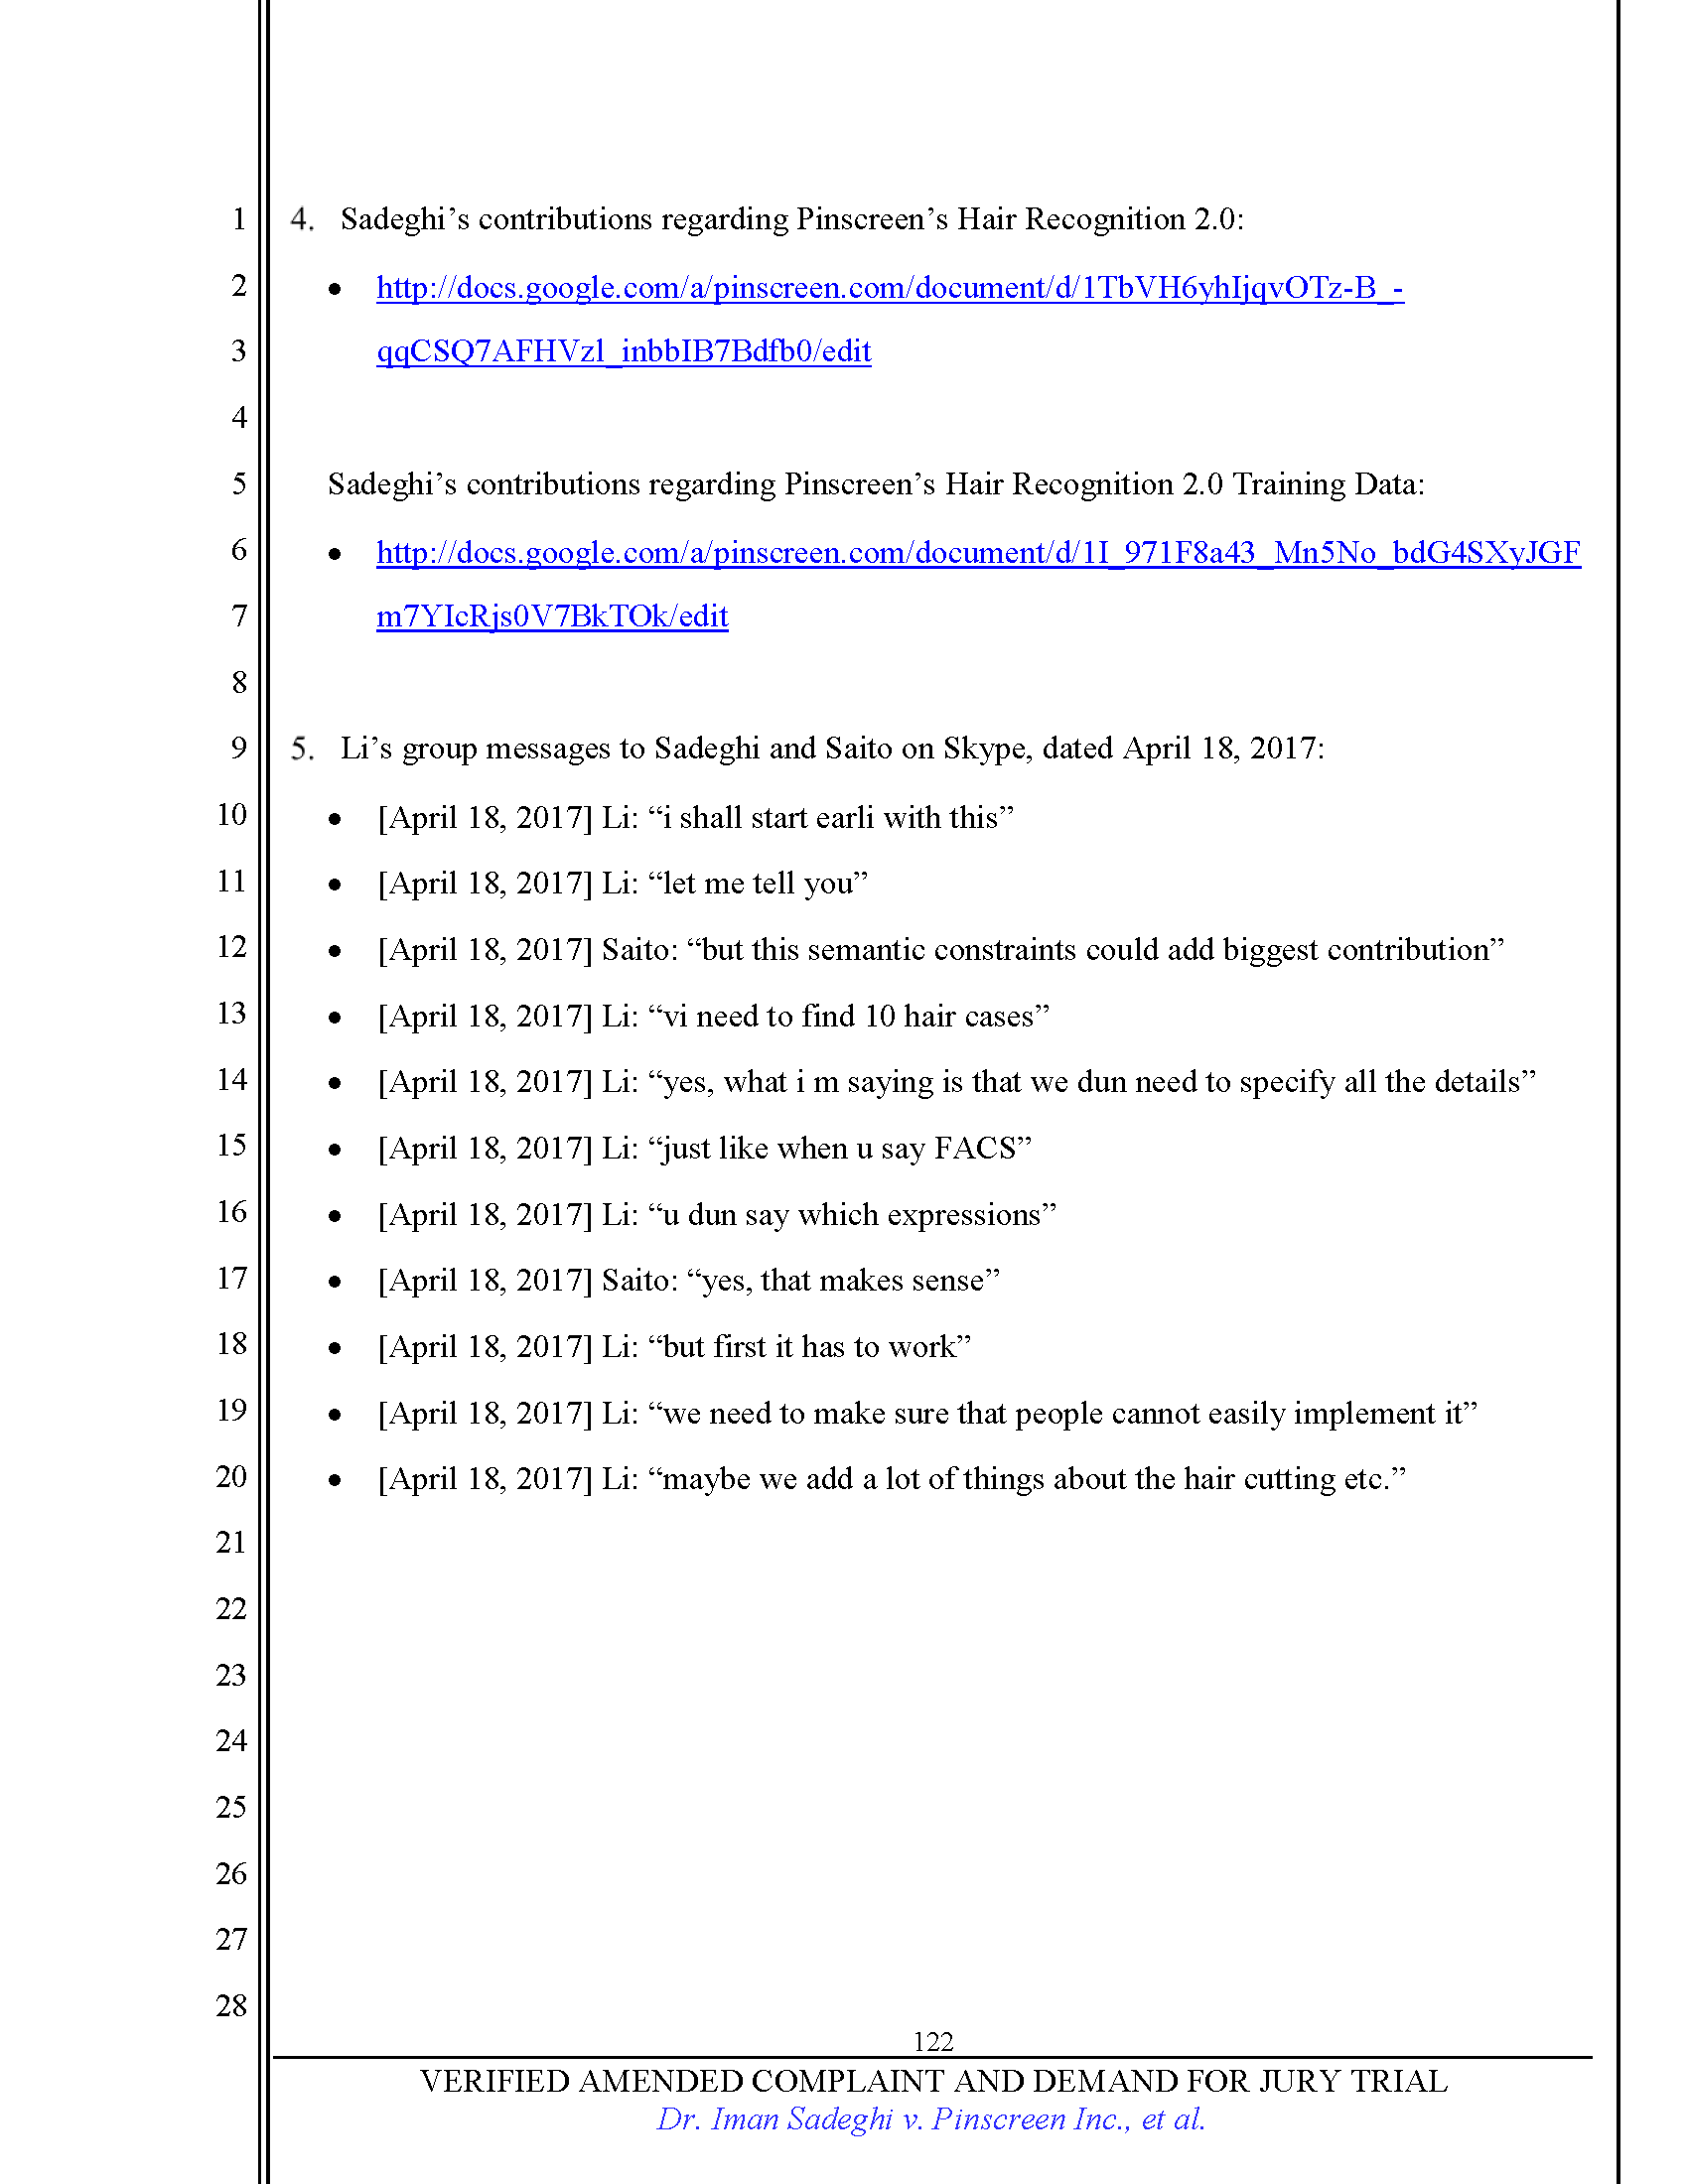 First Amended Complaint (FAC) Page 122